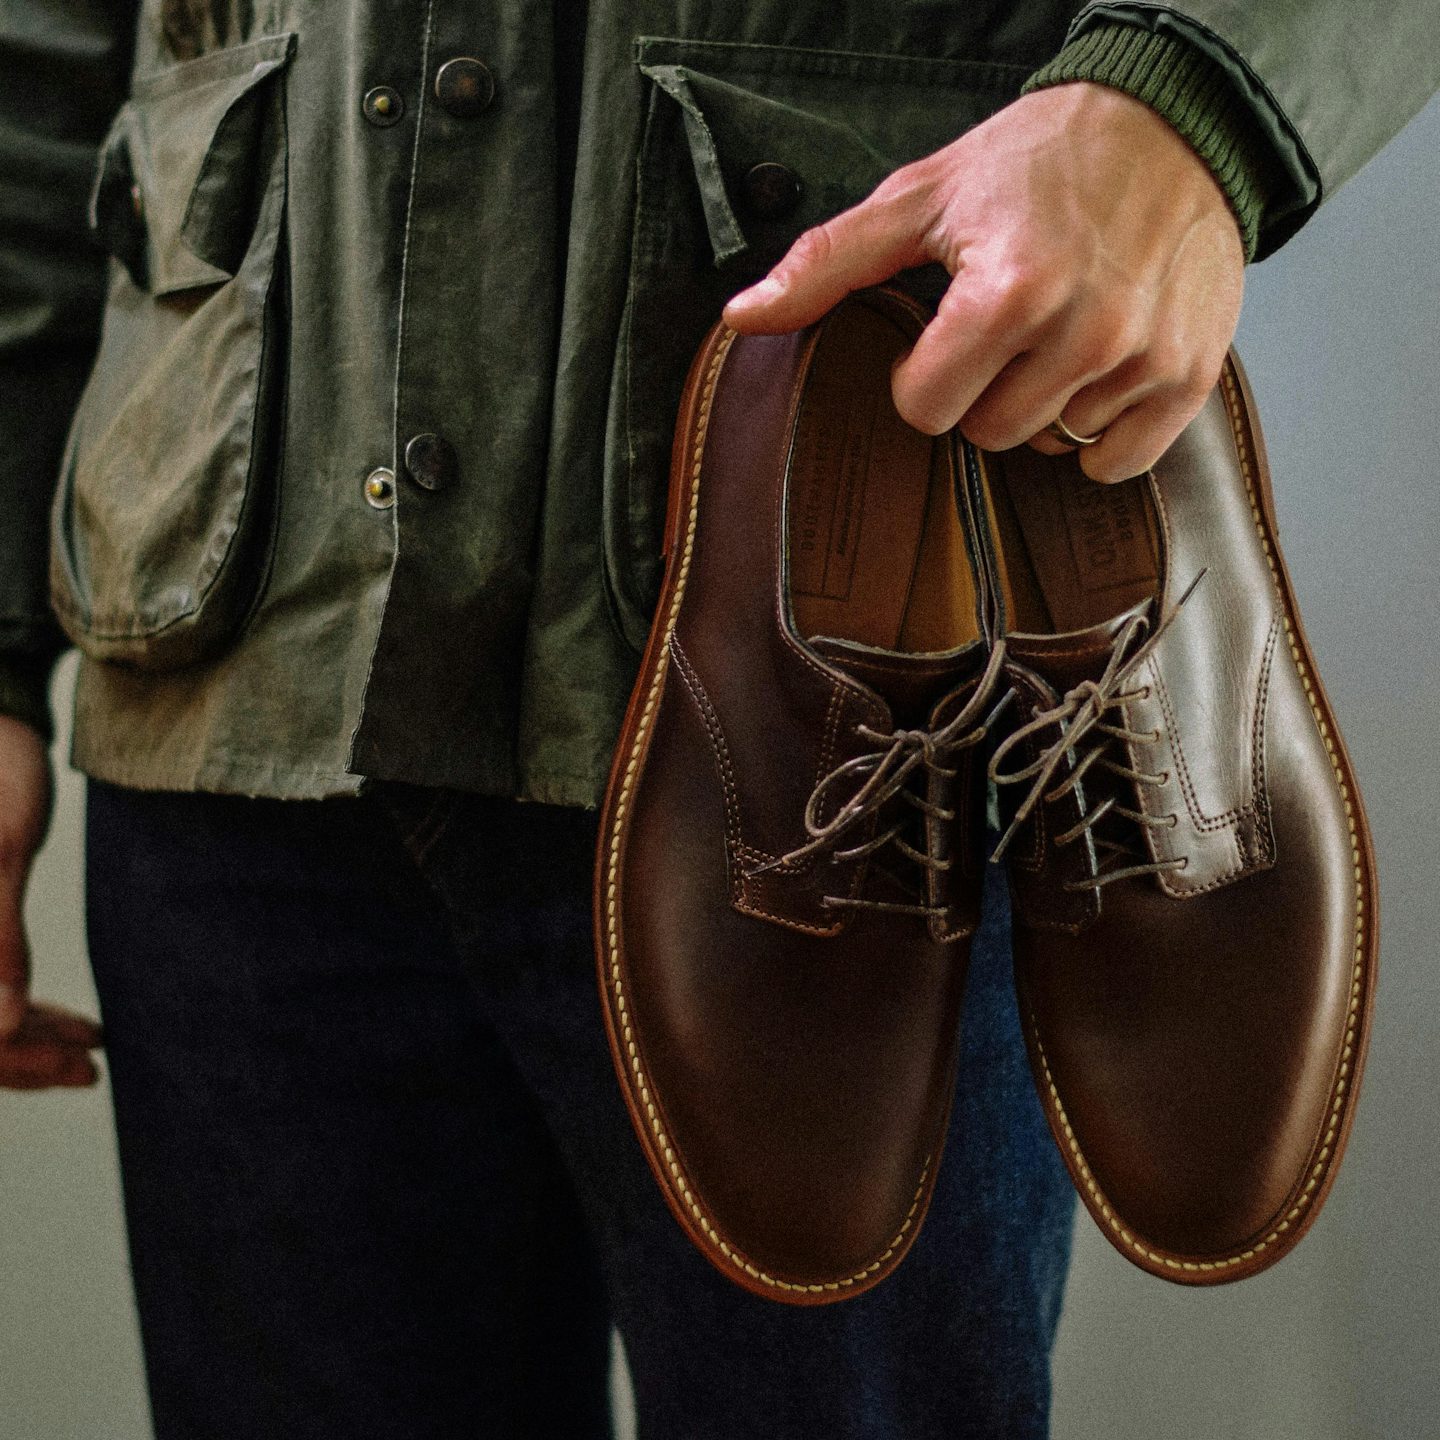 Plain Toe Blucher - Brown Chromexcel, Leather Sole with Dovetail